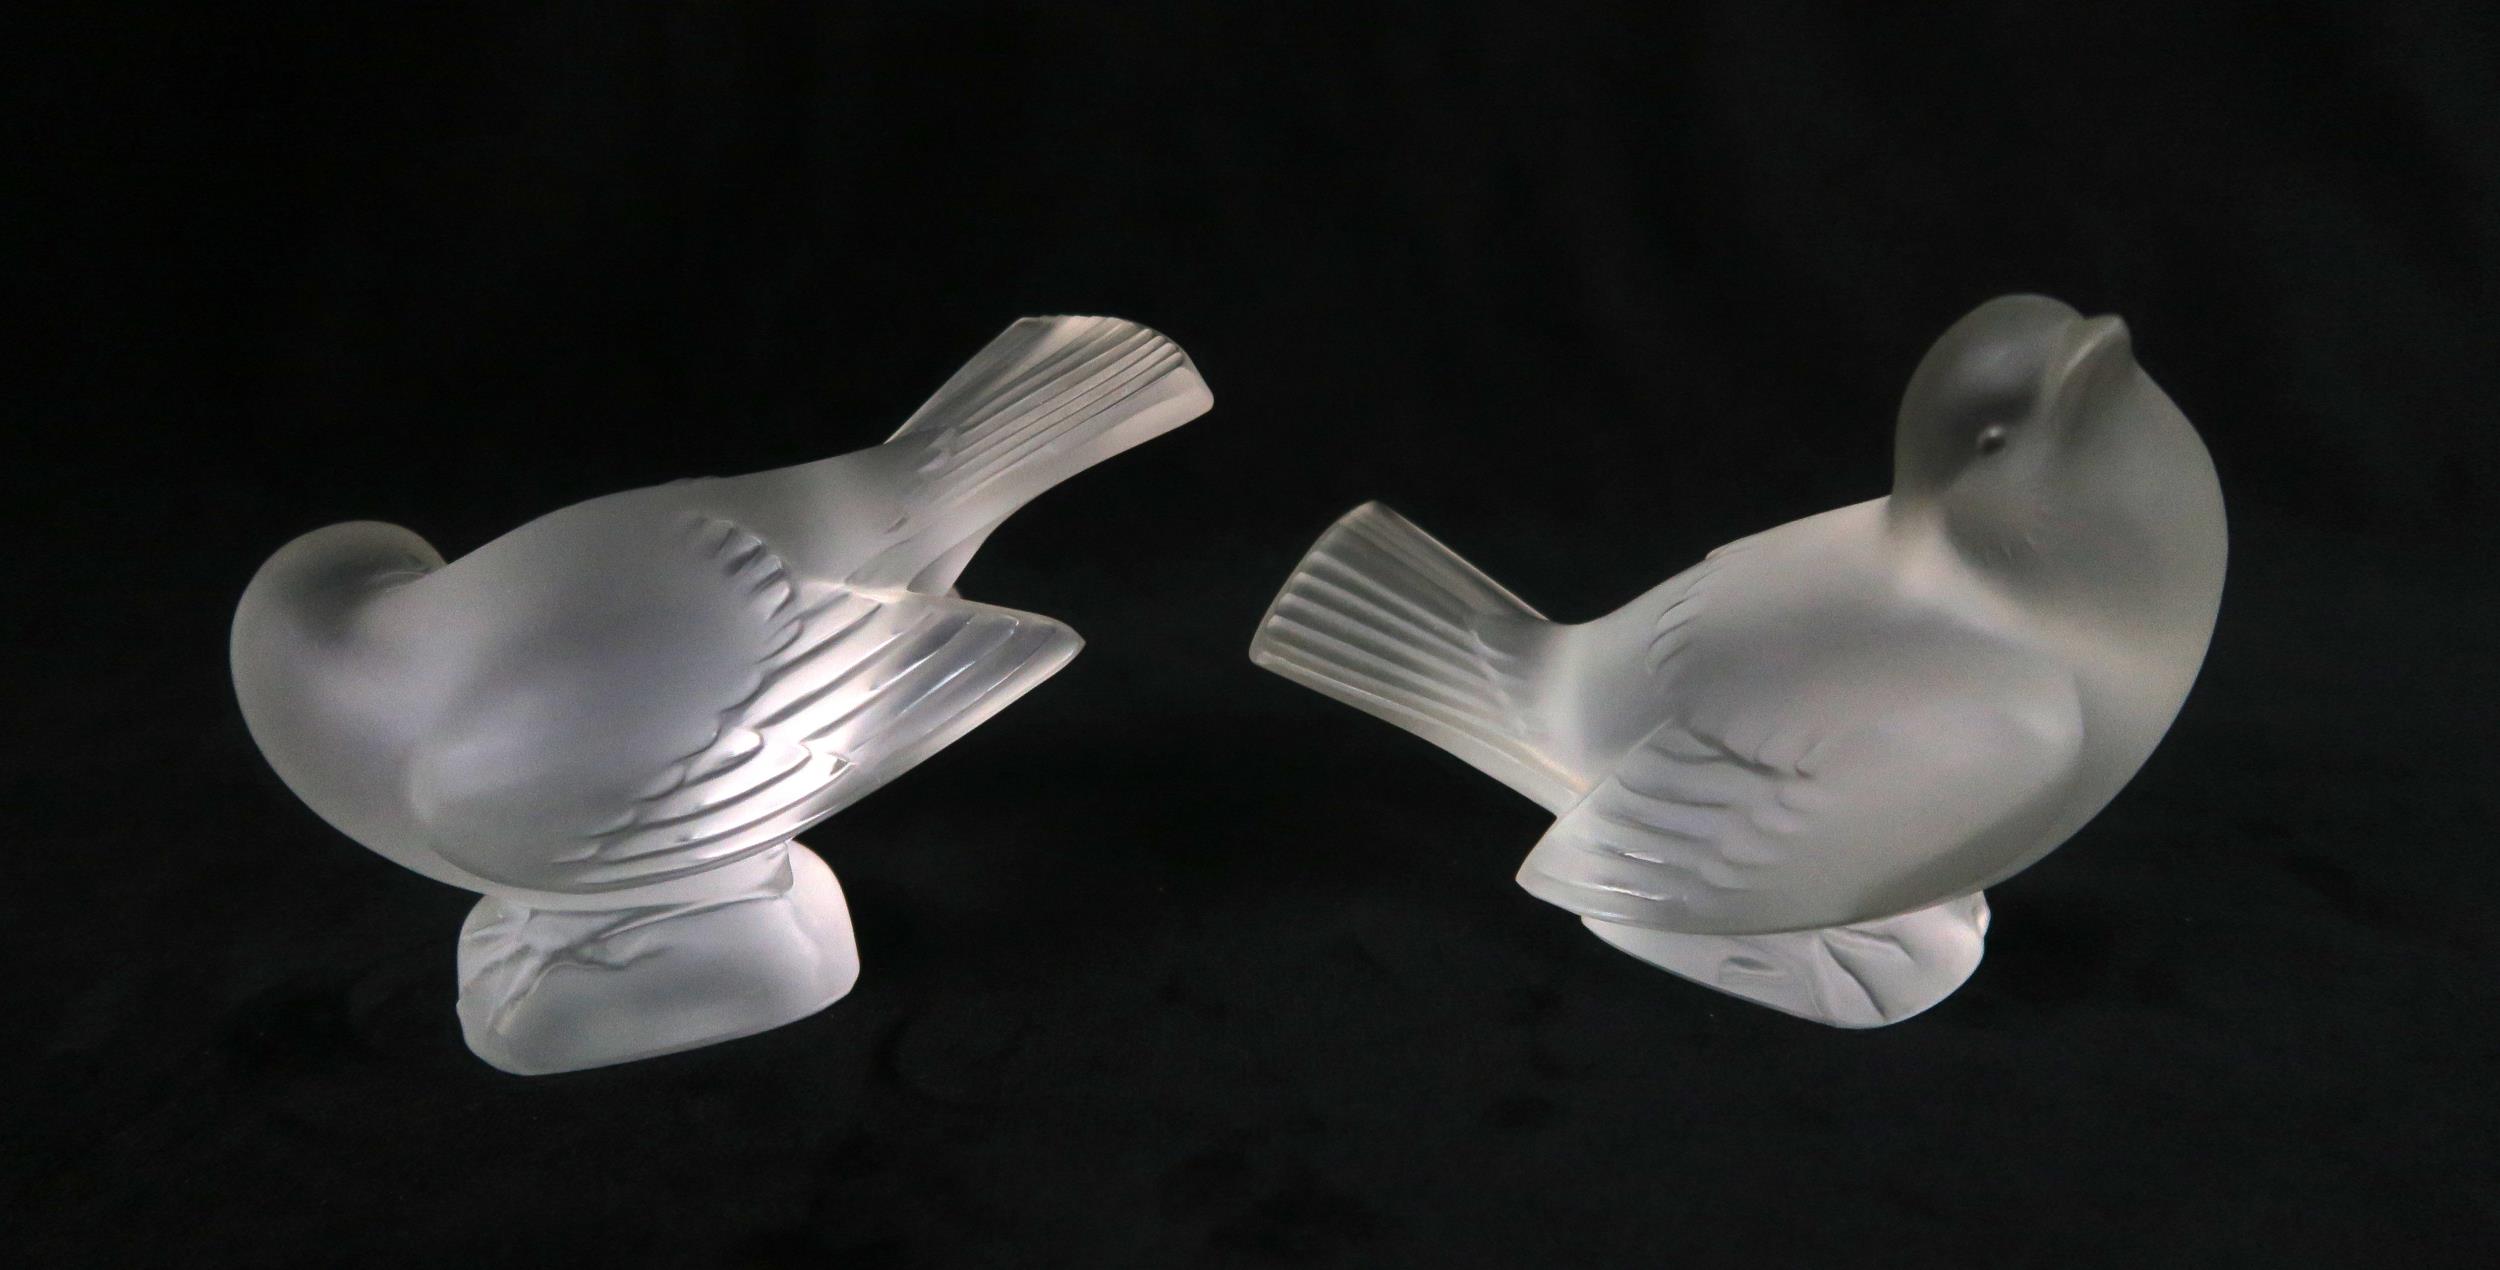 A PAIR OF LALIQUE BIRDS including Moineau Coquet and the other Moineau Moquer, 11cm long together - Image 2 of 5